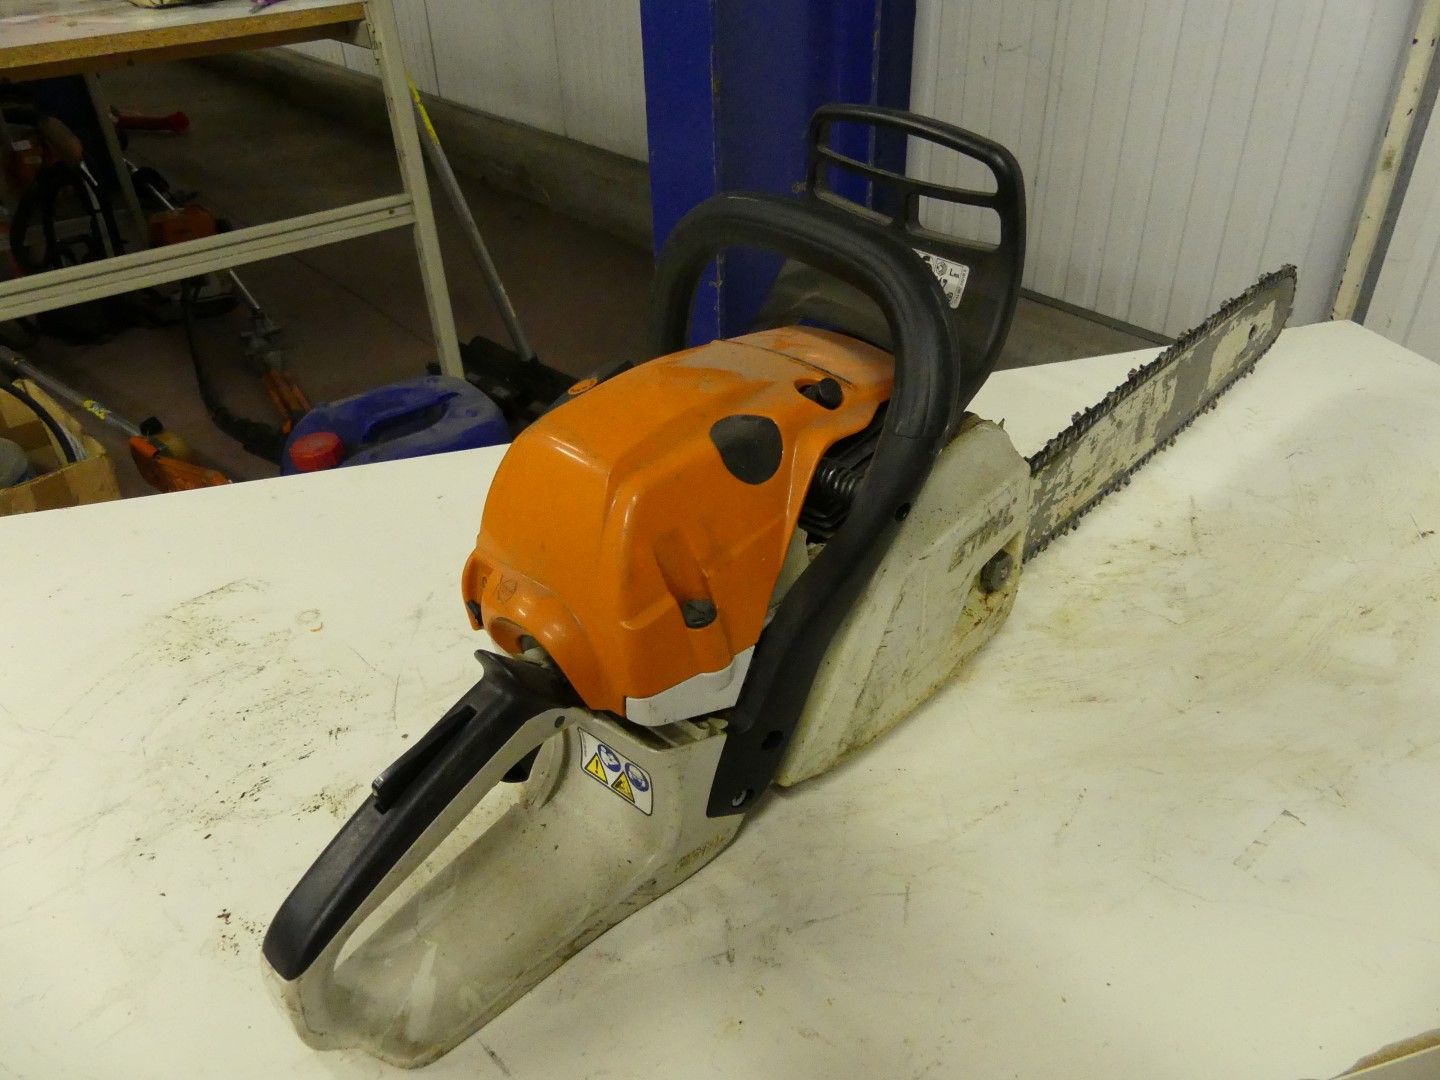 Null STIHL THERMAL CHAINSAW

2015